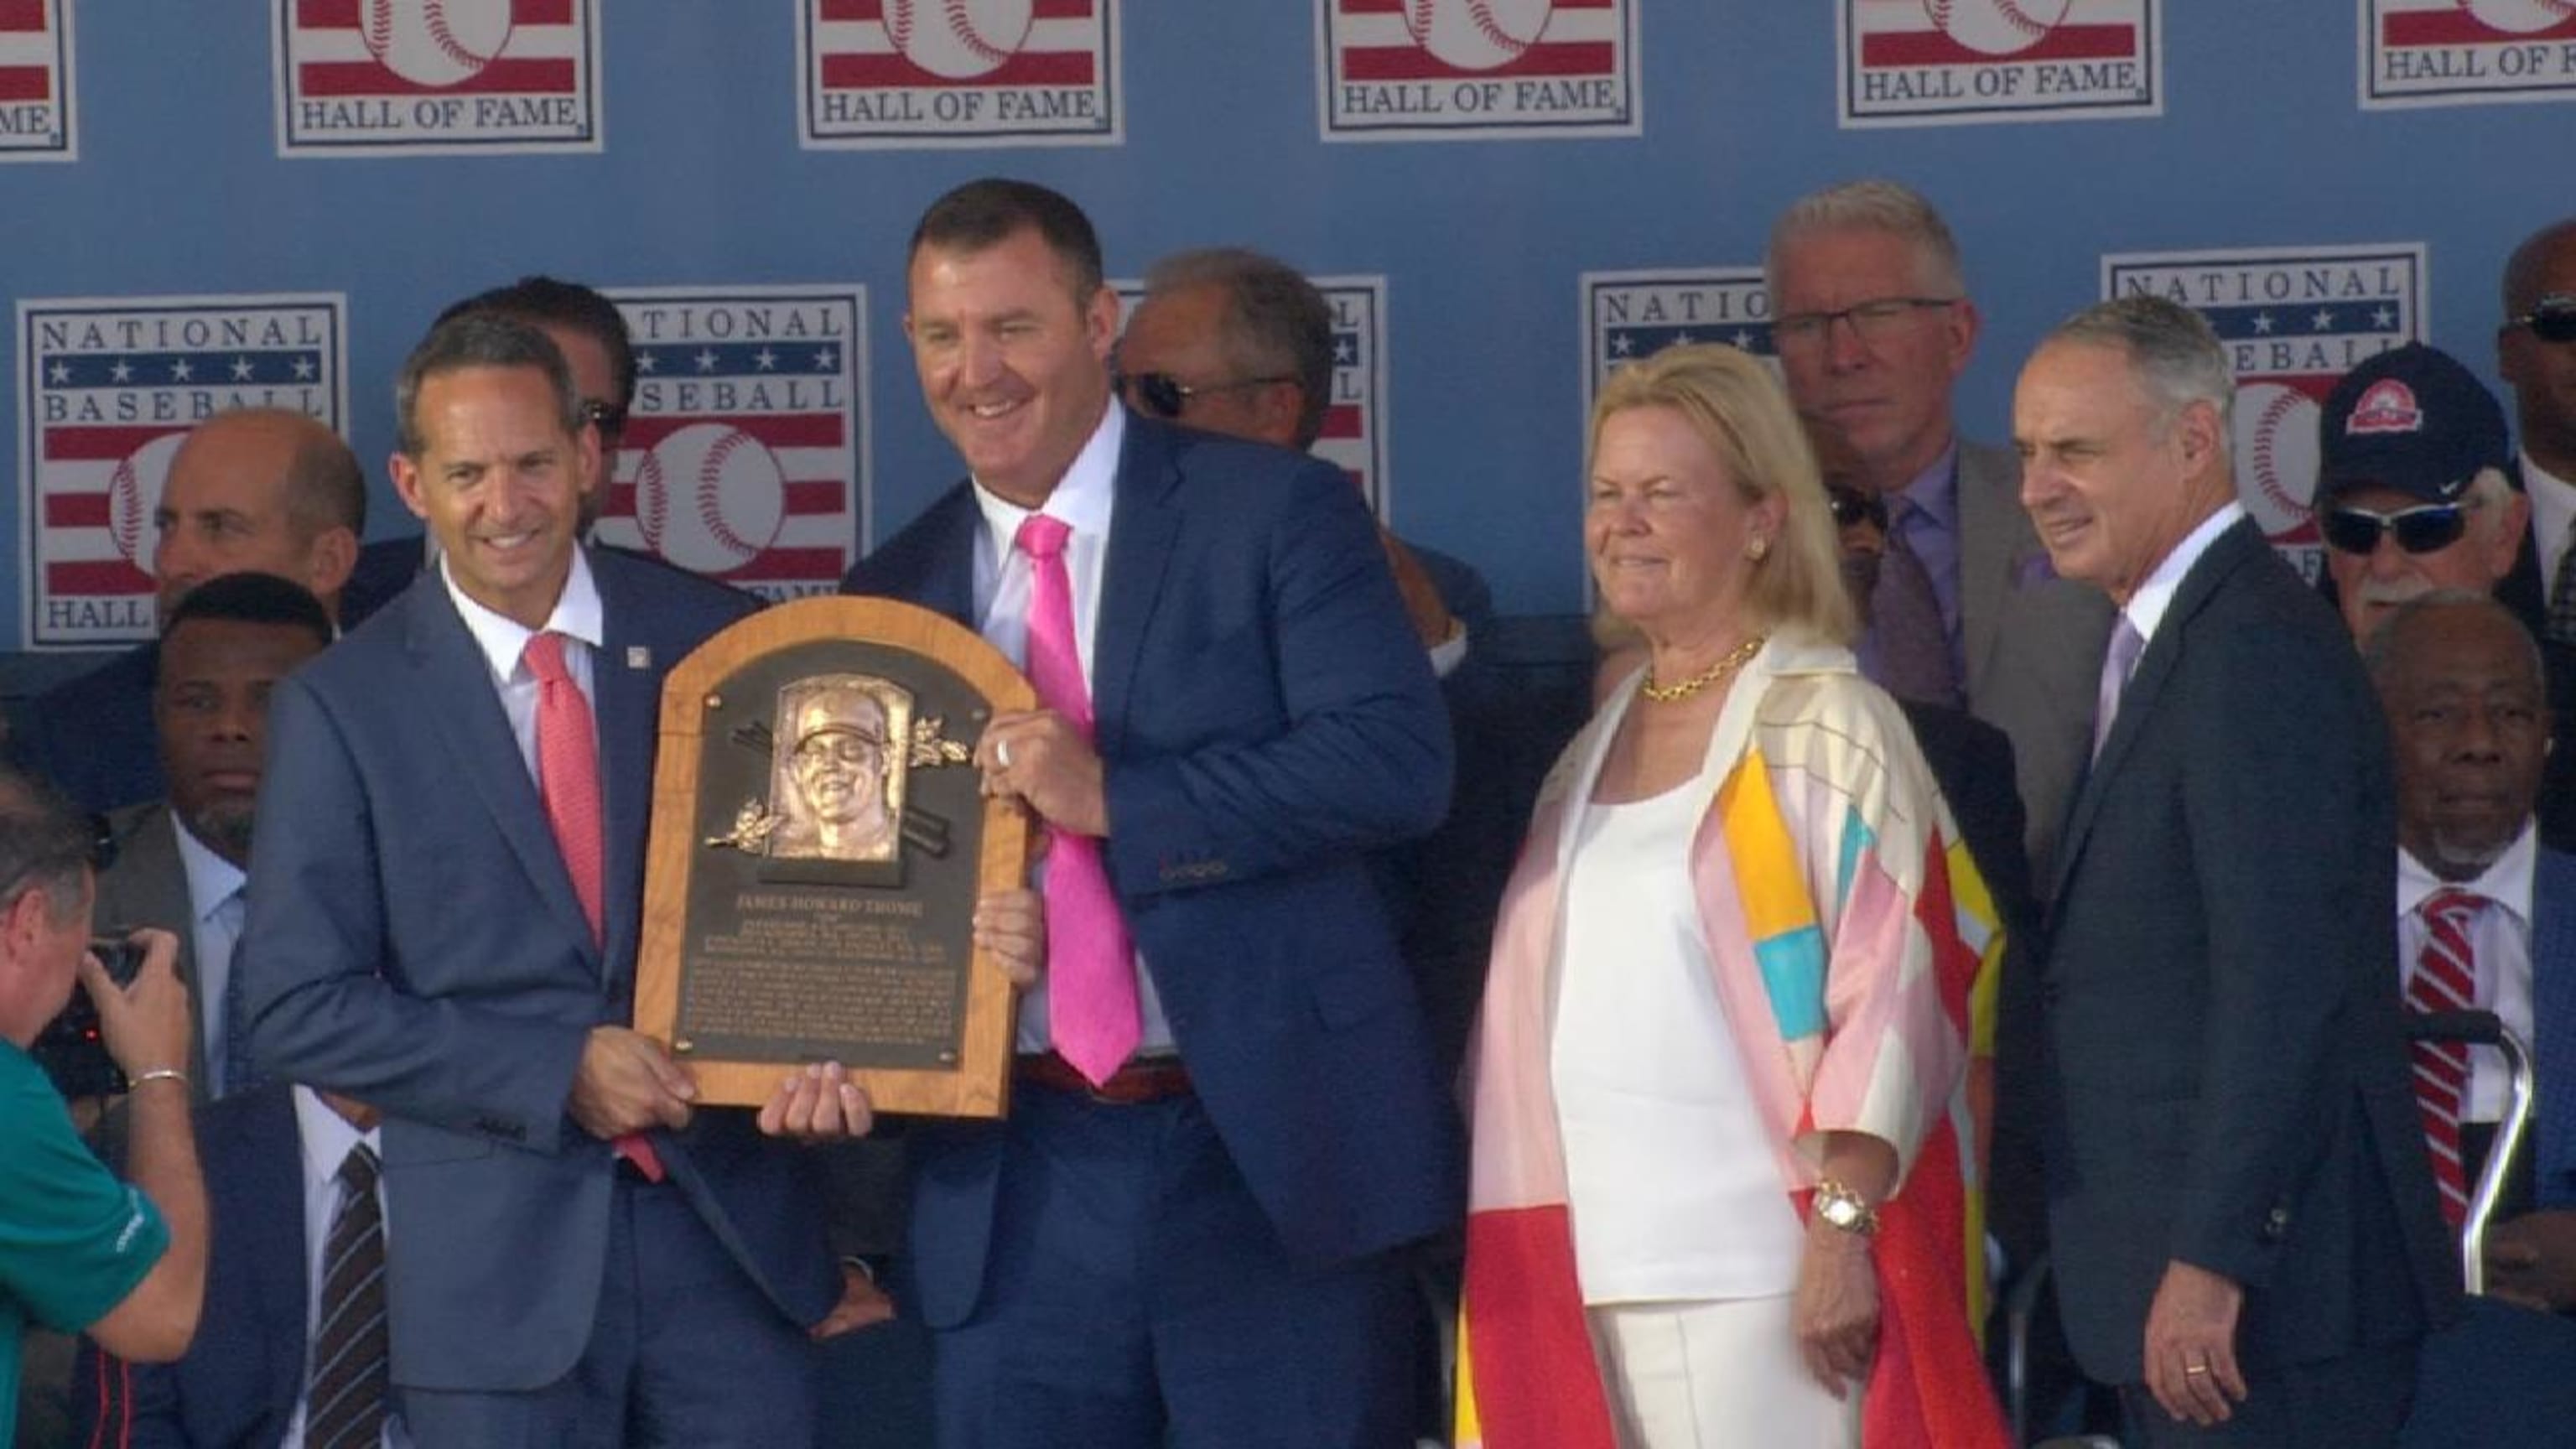 Read Jim Thome's Baseball Hall of Fame full induction speech 